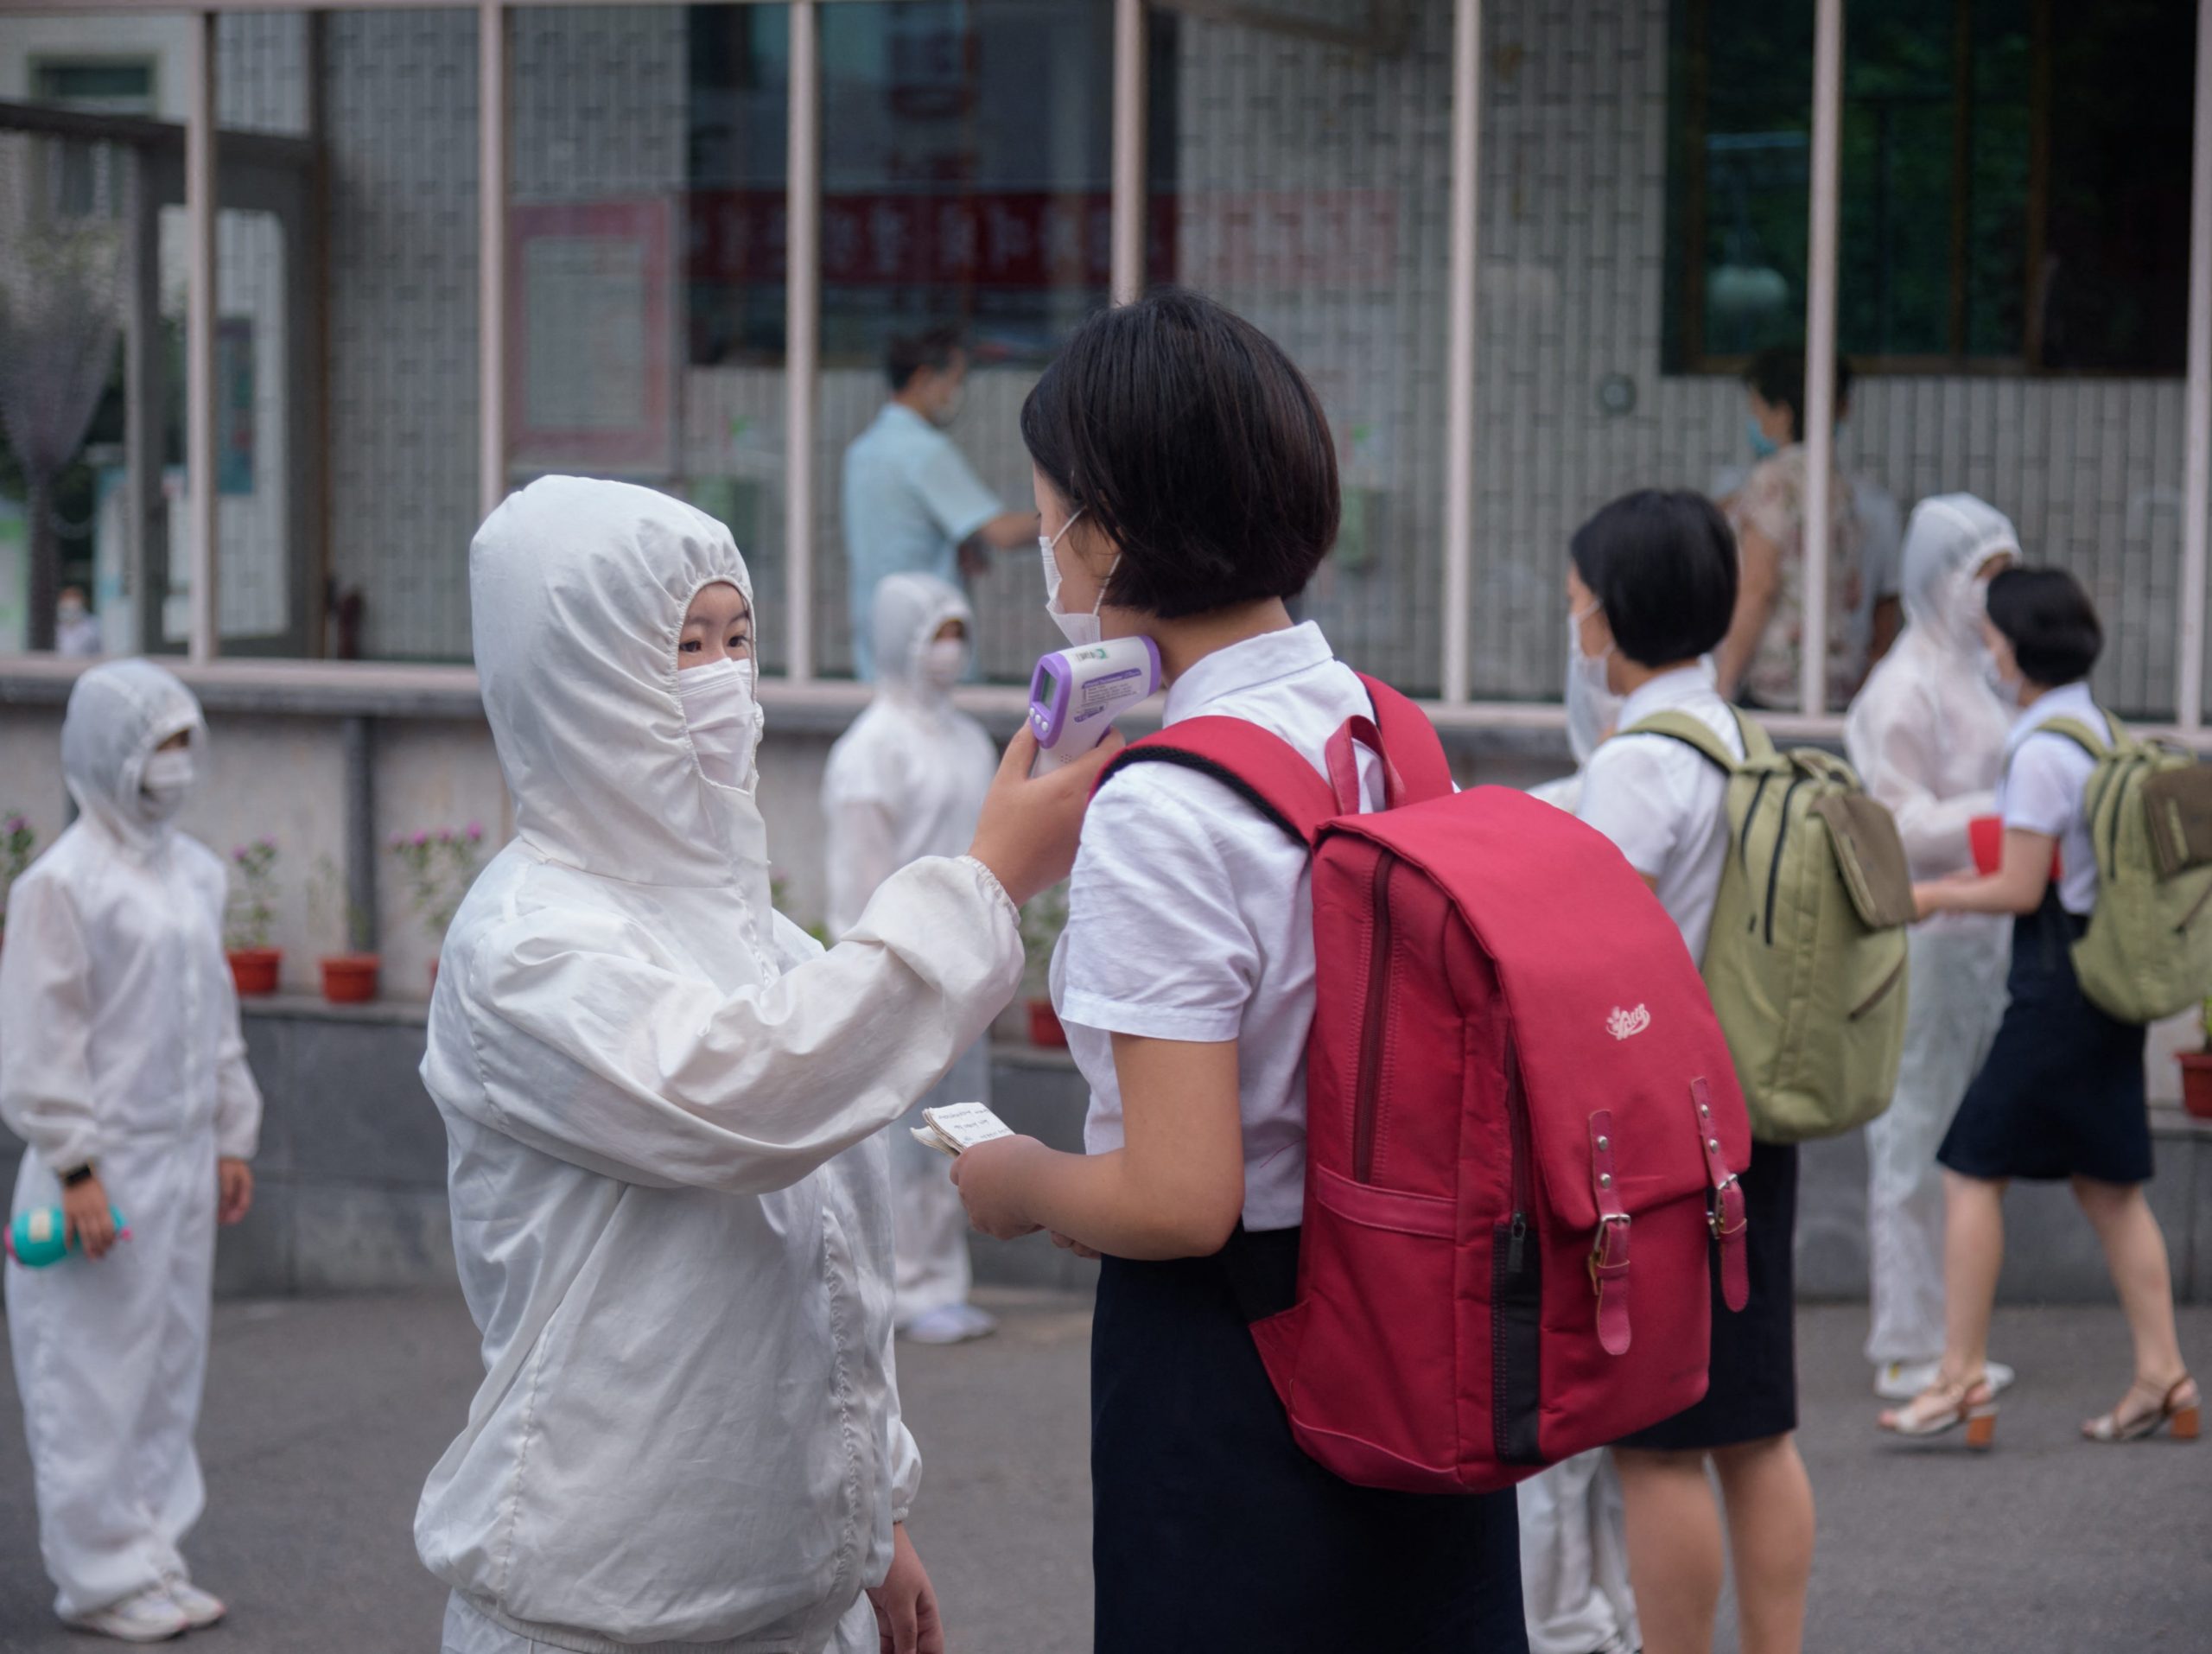 Students of the Pyongyang Jang Chol Gu University of Commerce undergo temperature checks before entering the campus, as part of preventative measures against COVID-19, in Pyongyang on August 11, 2021.